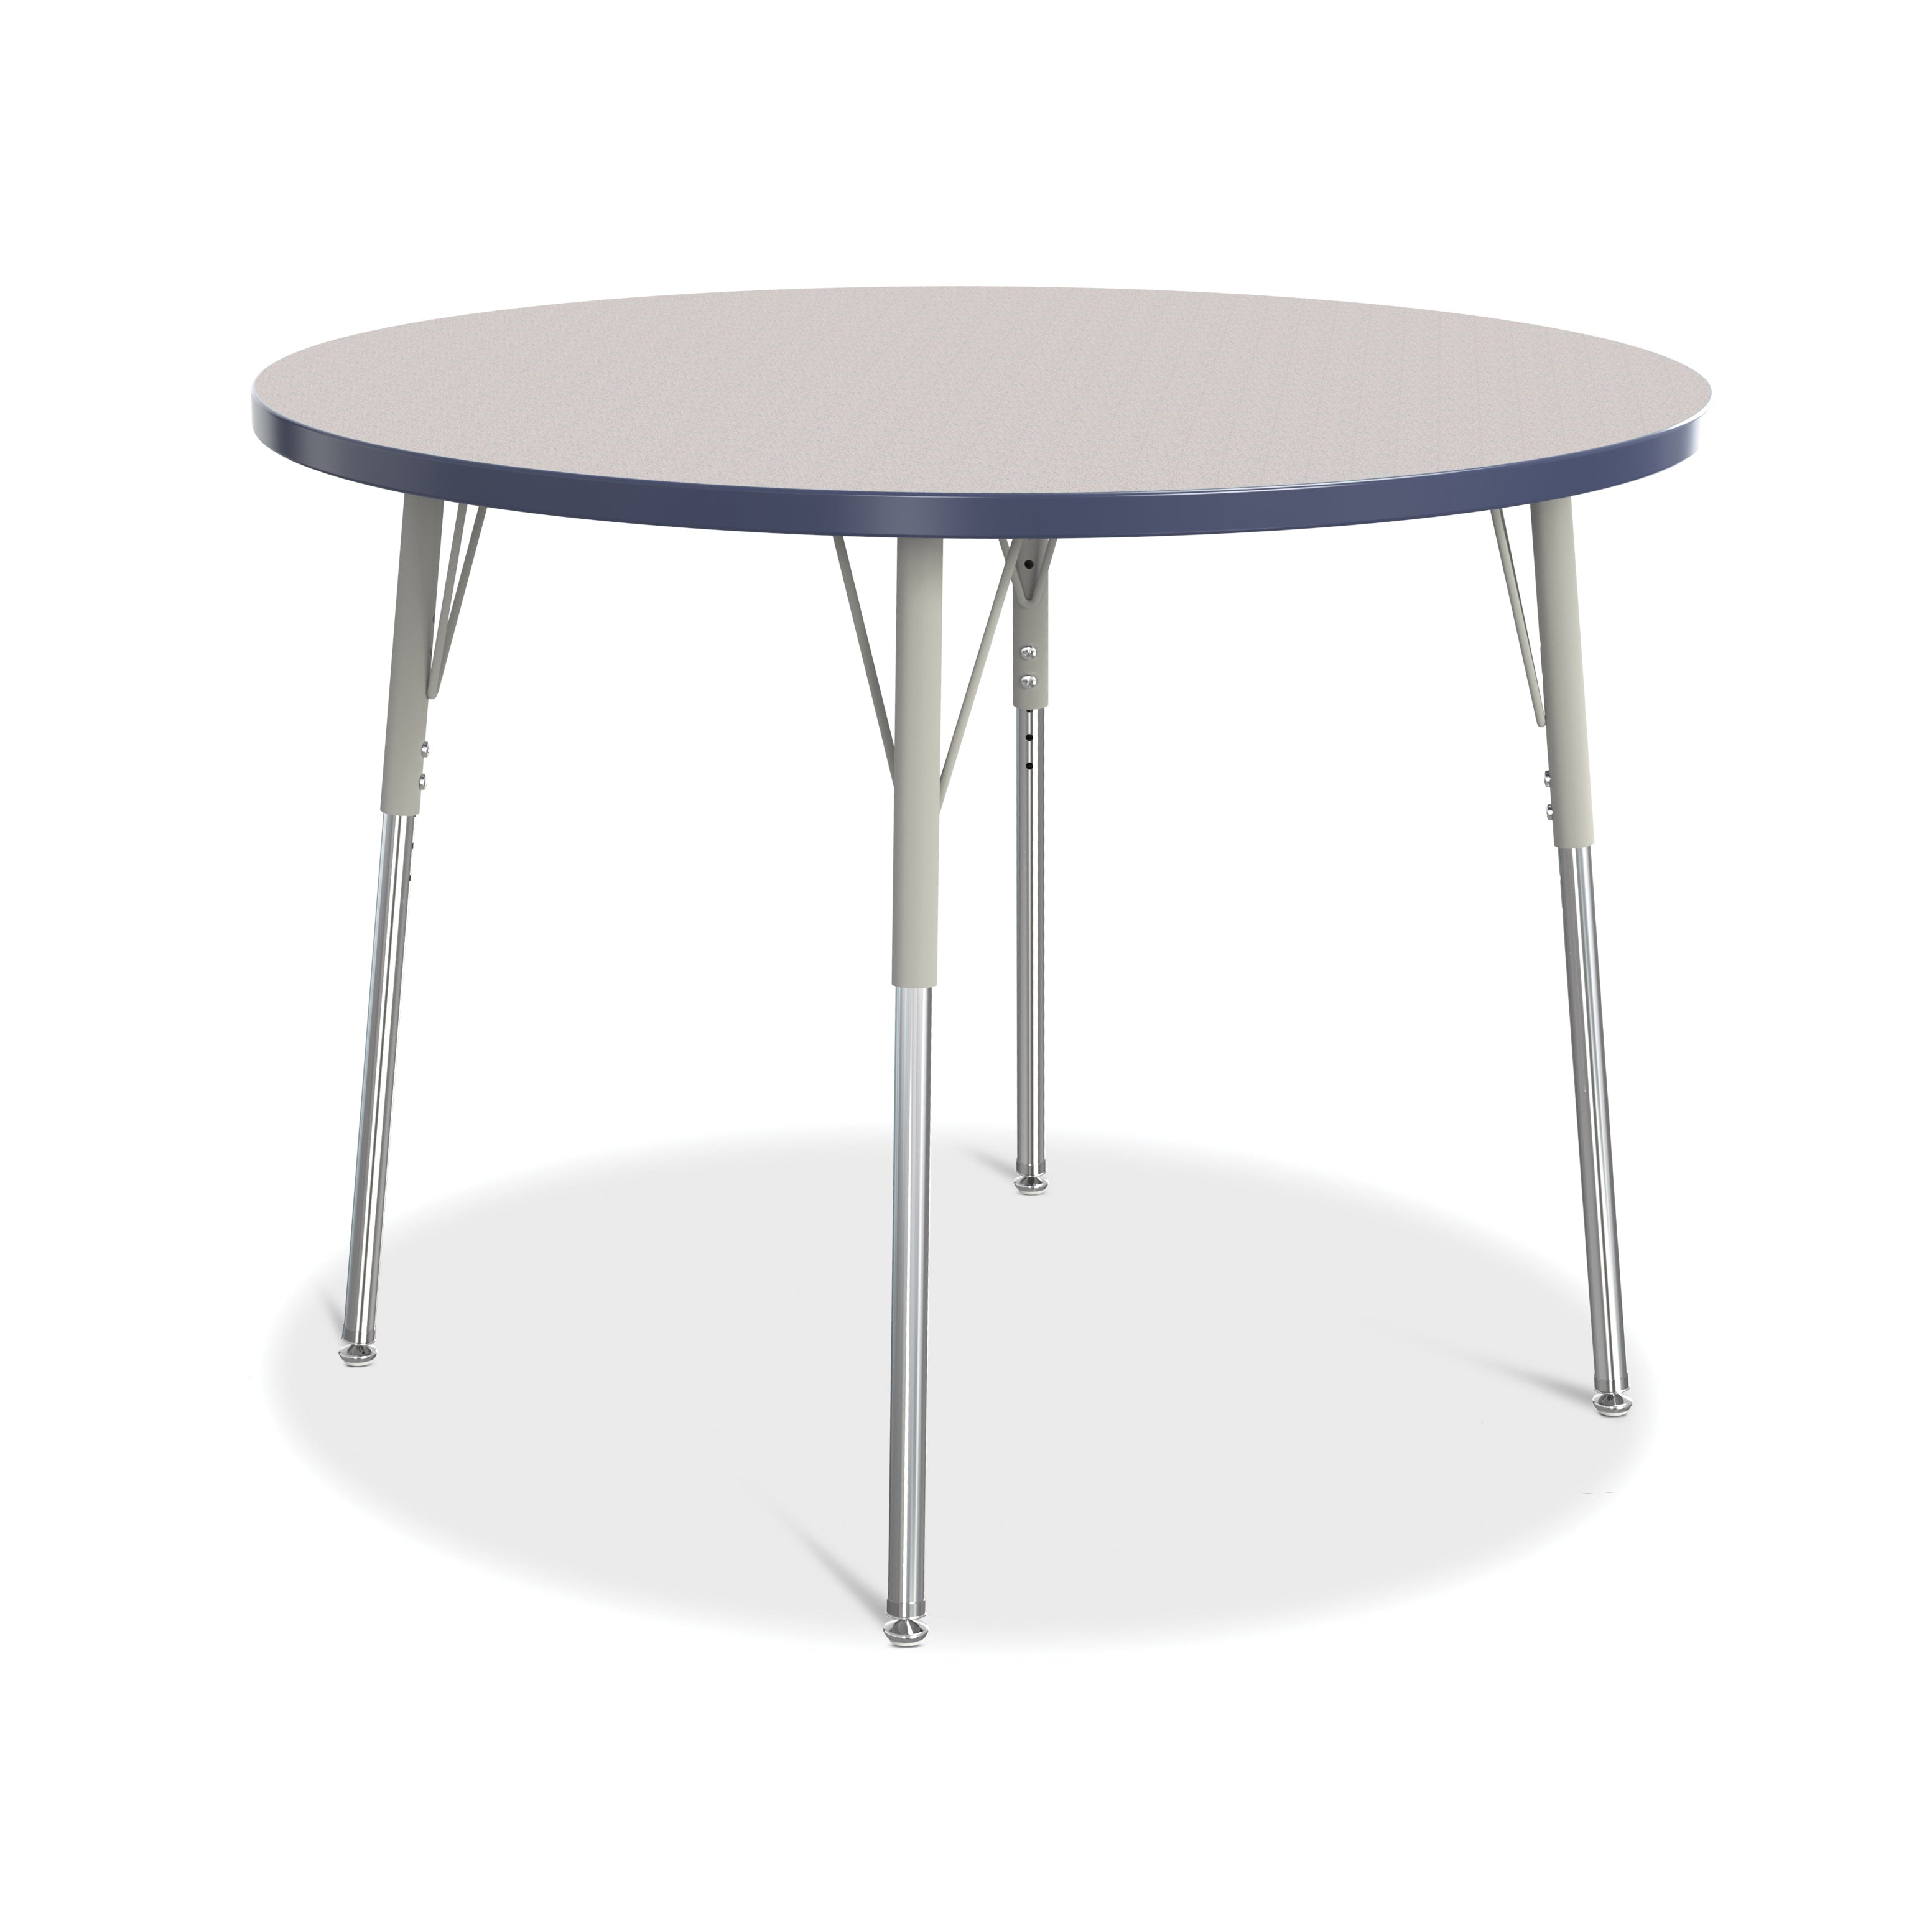 6468JCA112, Berries Round Activity Table - 42" Diameter, A-height - Freckled Gray/Navy/Gray